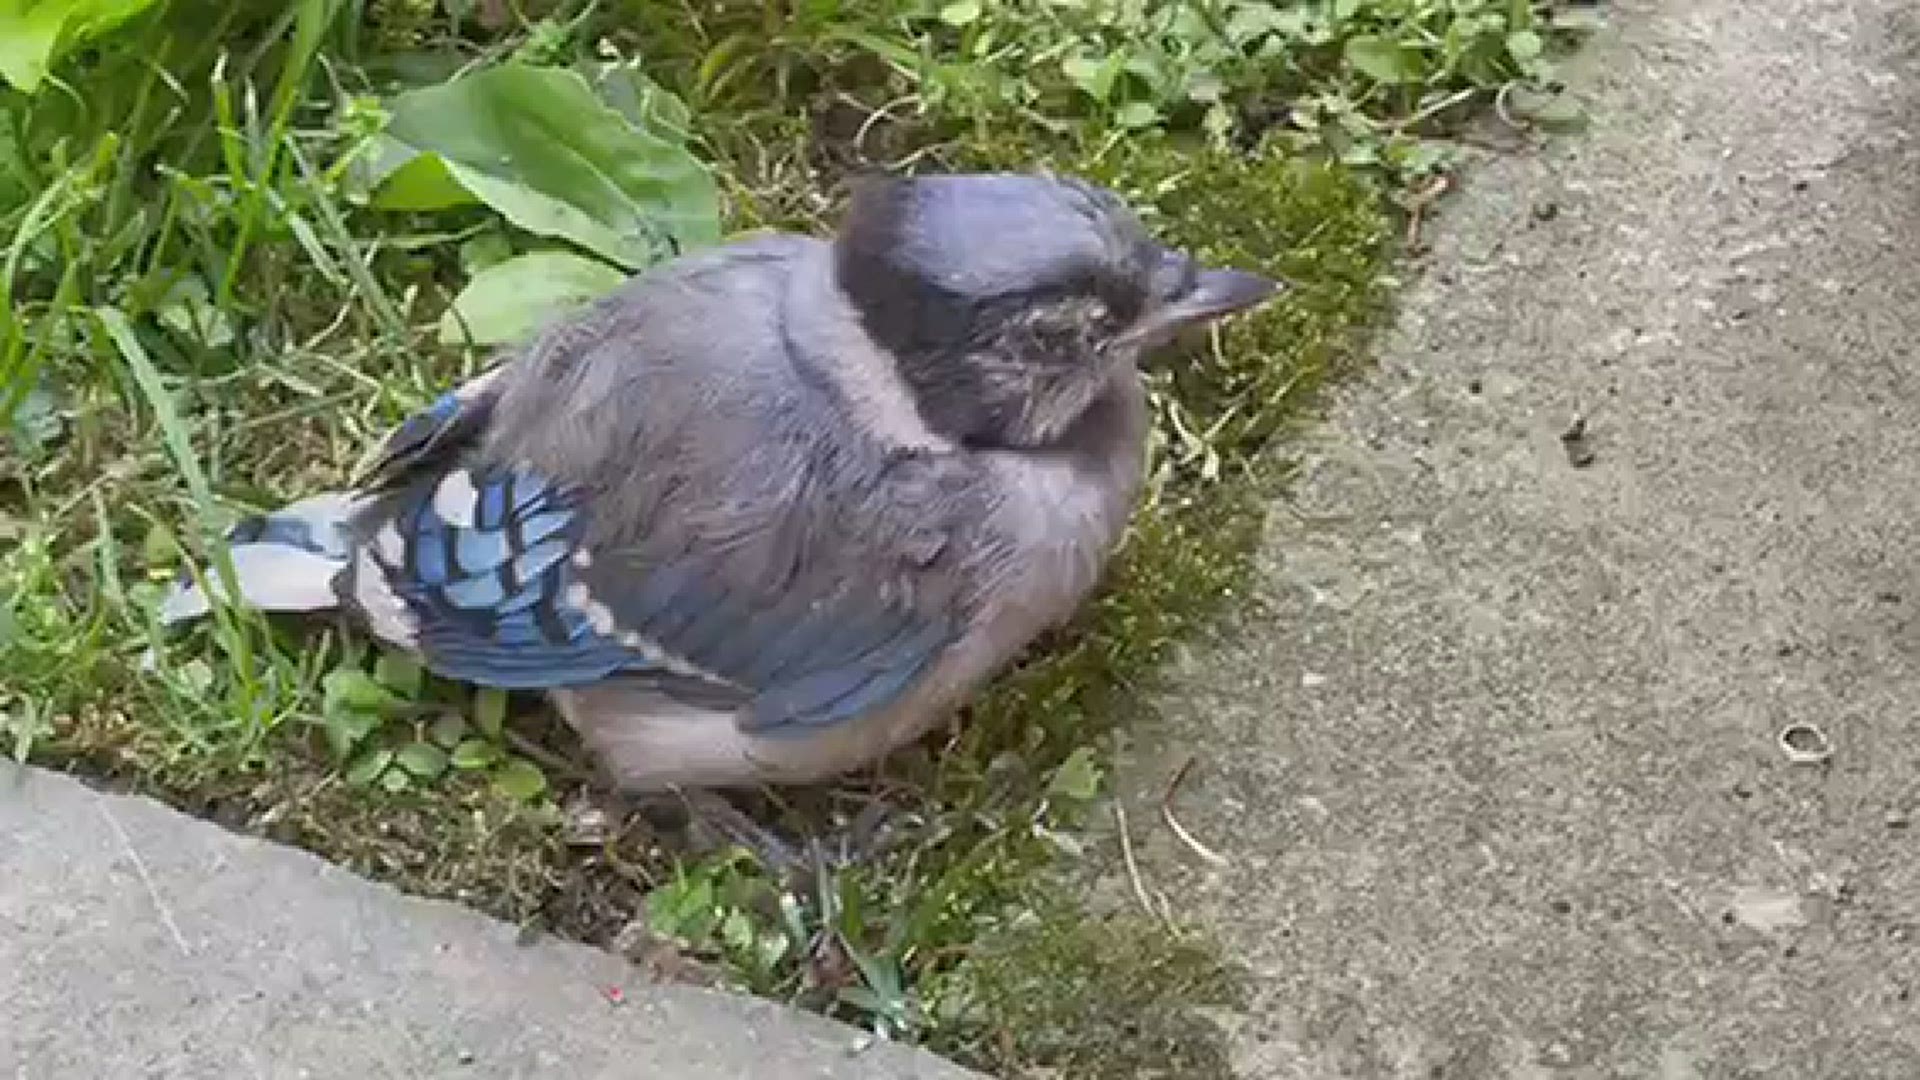 Blue Jays, Starlings, the Common Grackle and Robins are among the species dying in a "bird mortality event." (Video courtesy Rebecca Nichols)